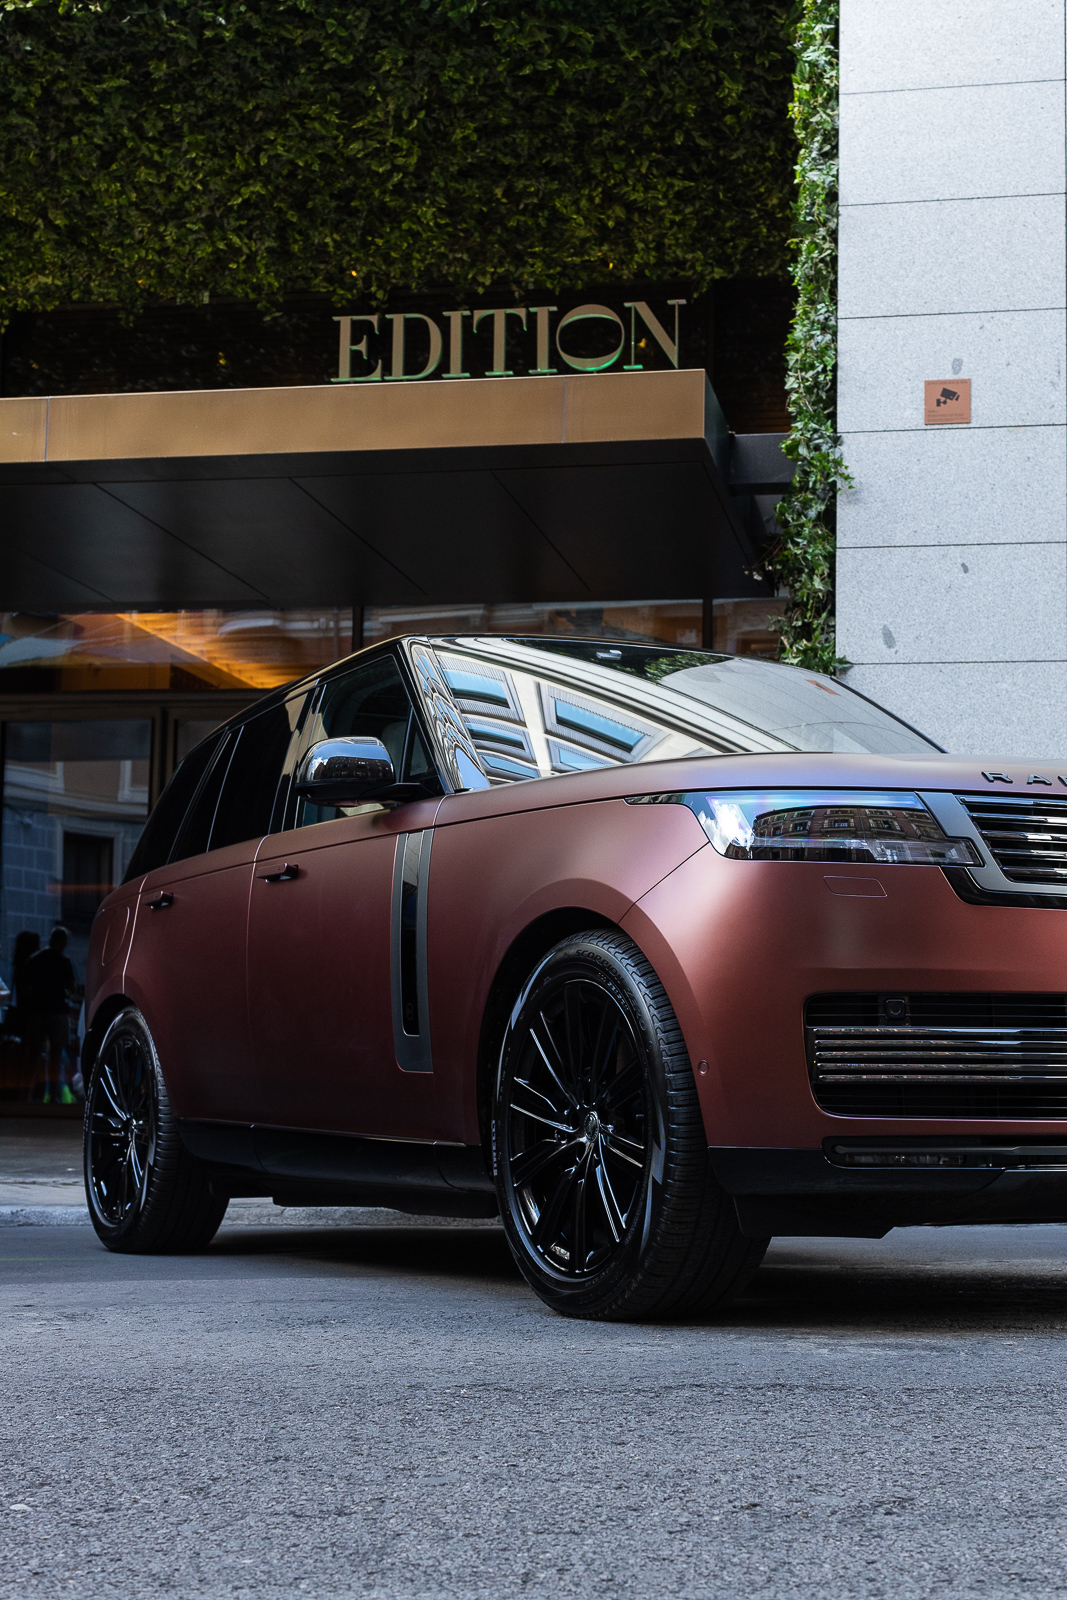 Range Rover outside the Madrid edition